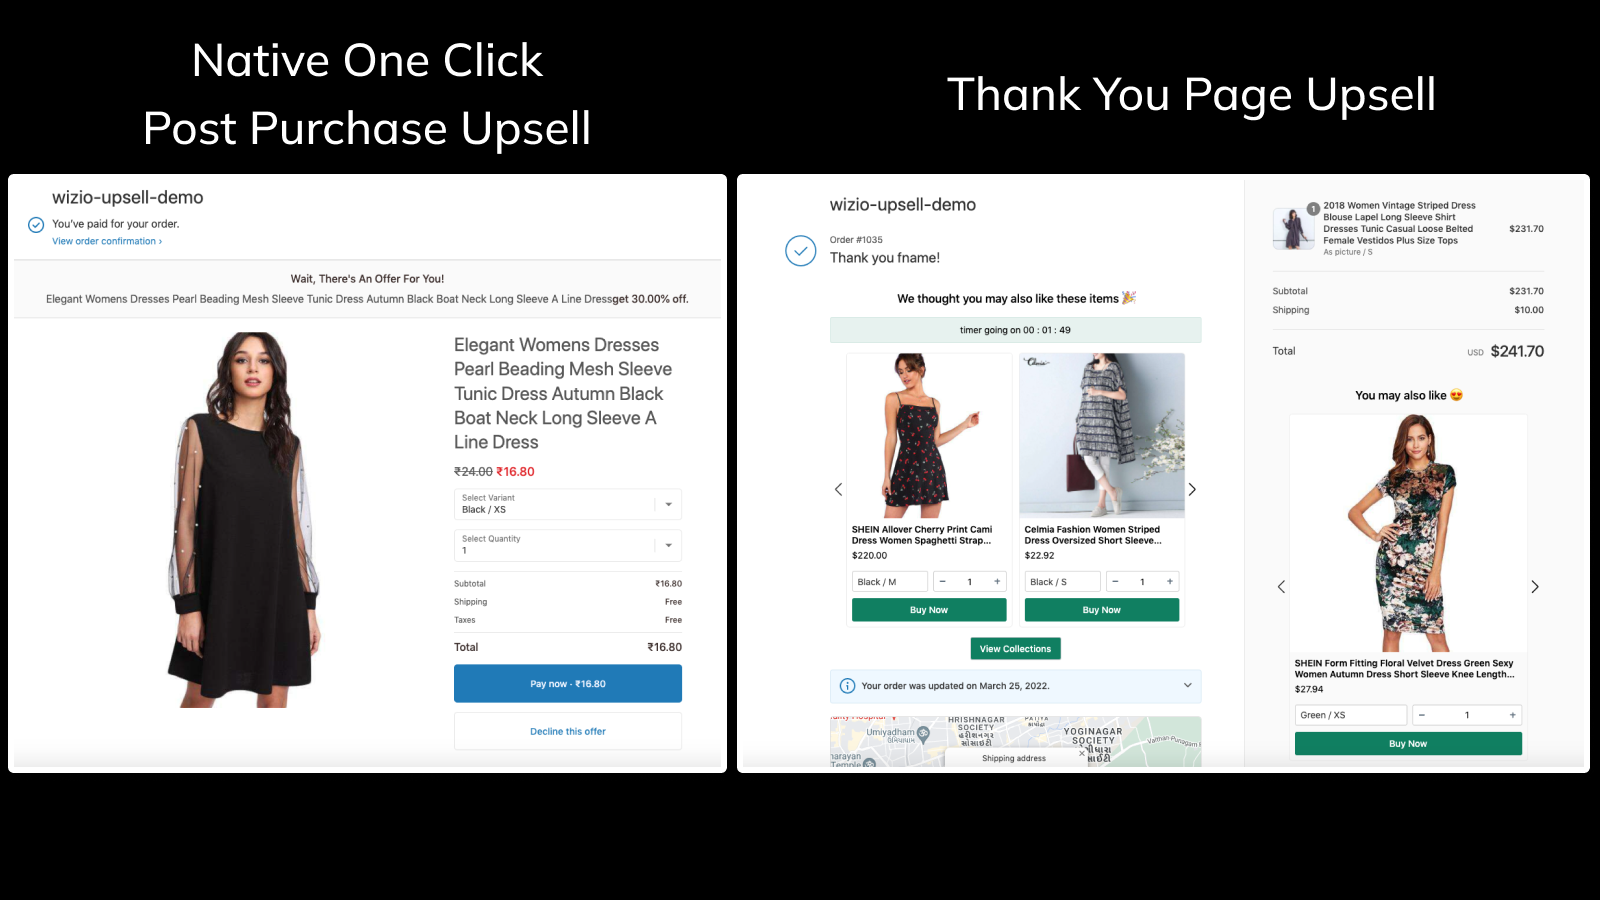 native one click post purchase en bedankpagina upsell